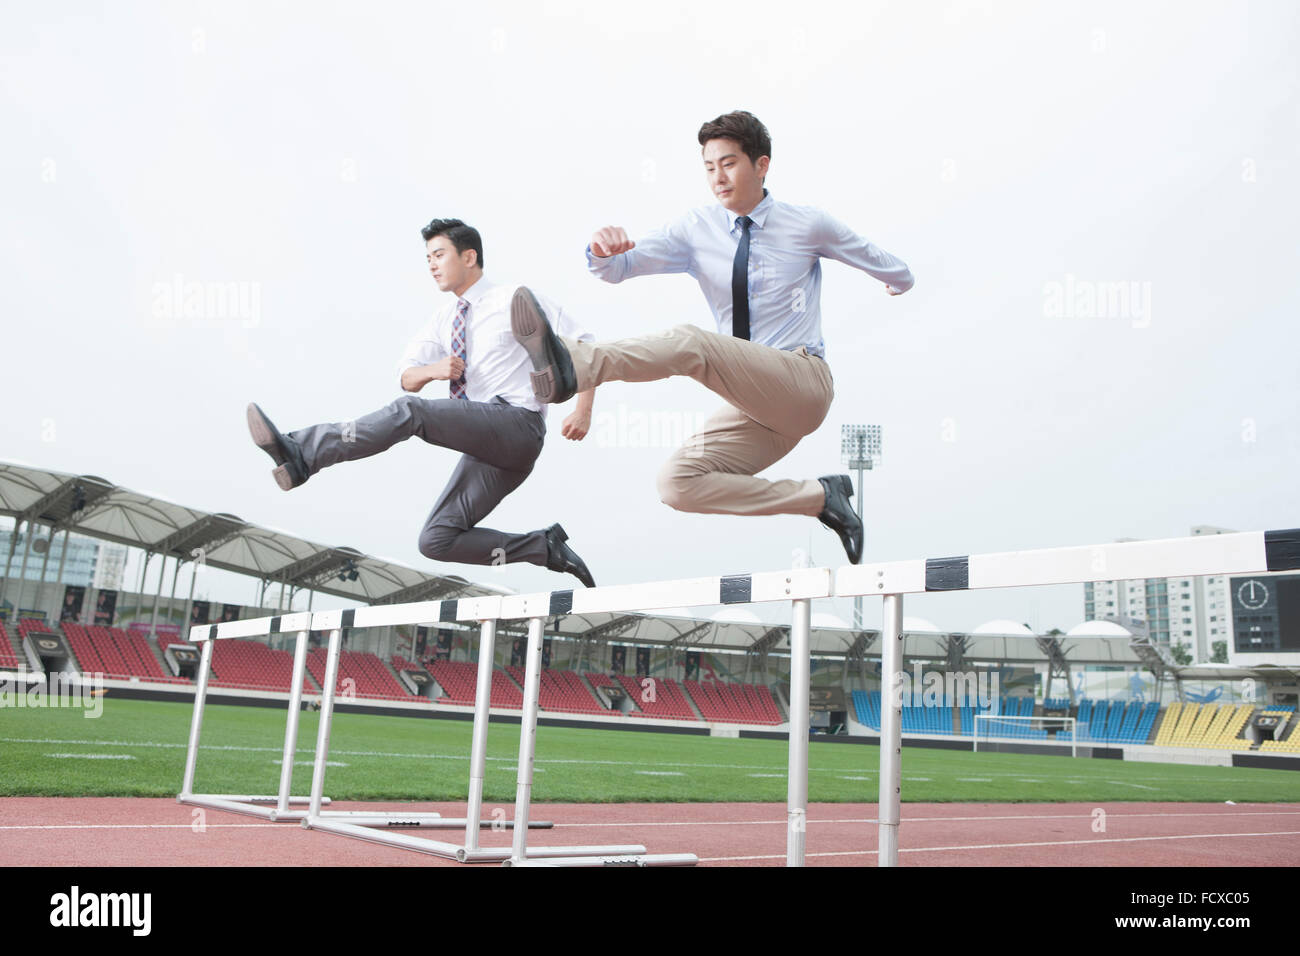 Two business men running and jumping over hurdles on a track with the background of sports field Stock Photo